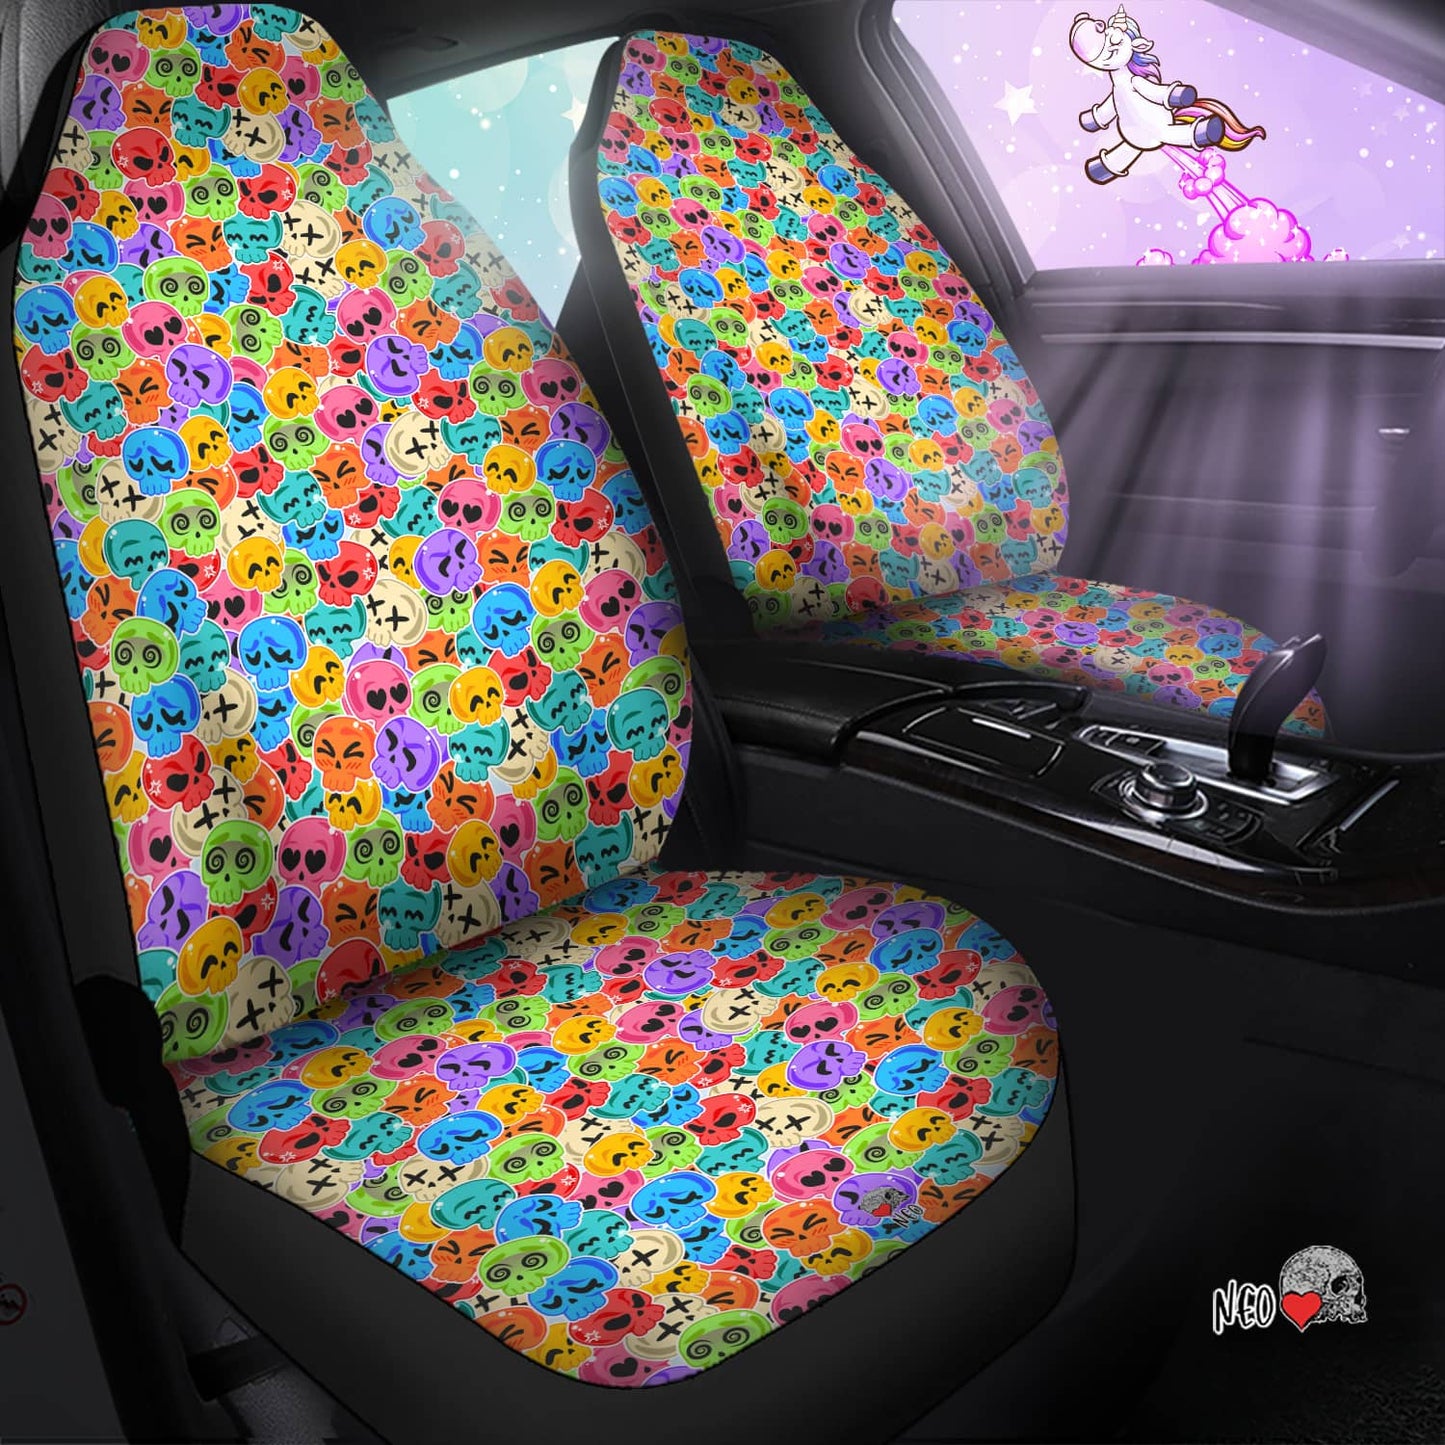 Skull Candy Car Seat Covers - NeoSkull